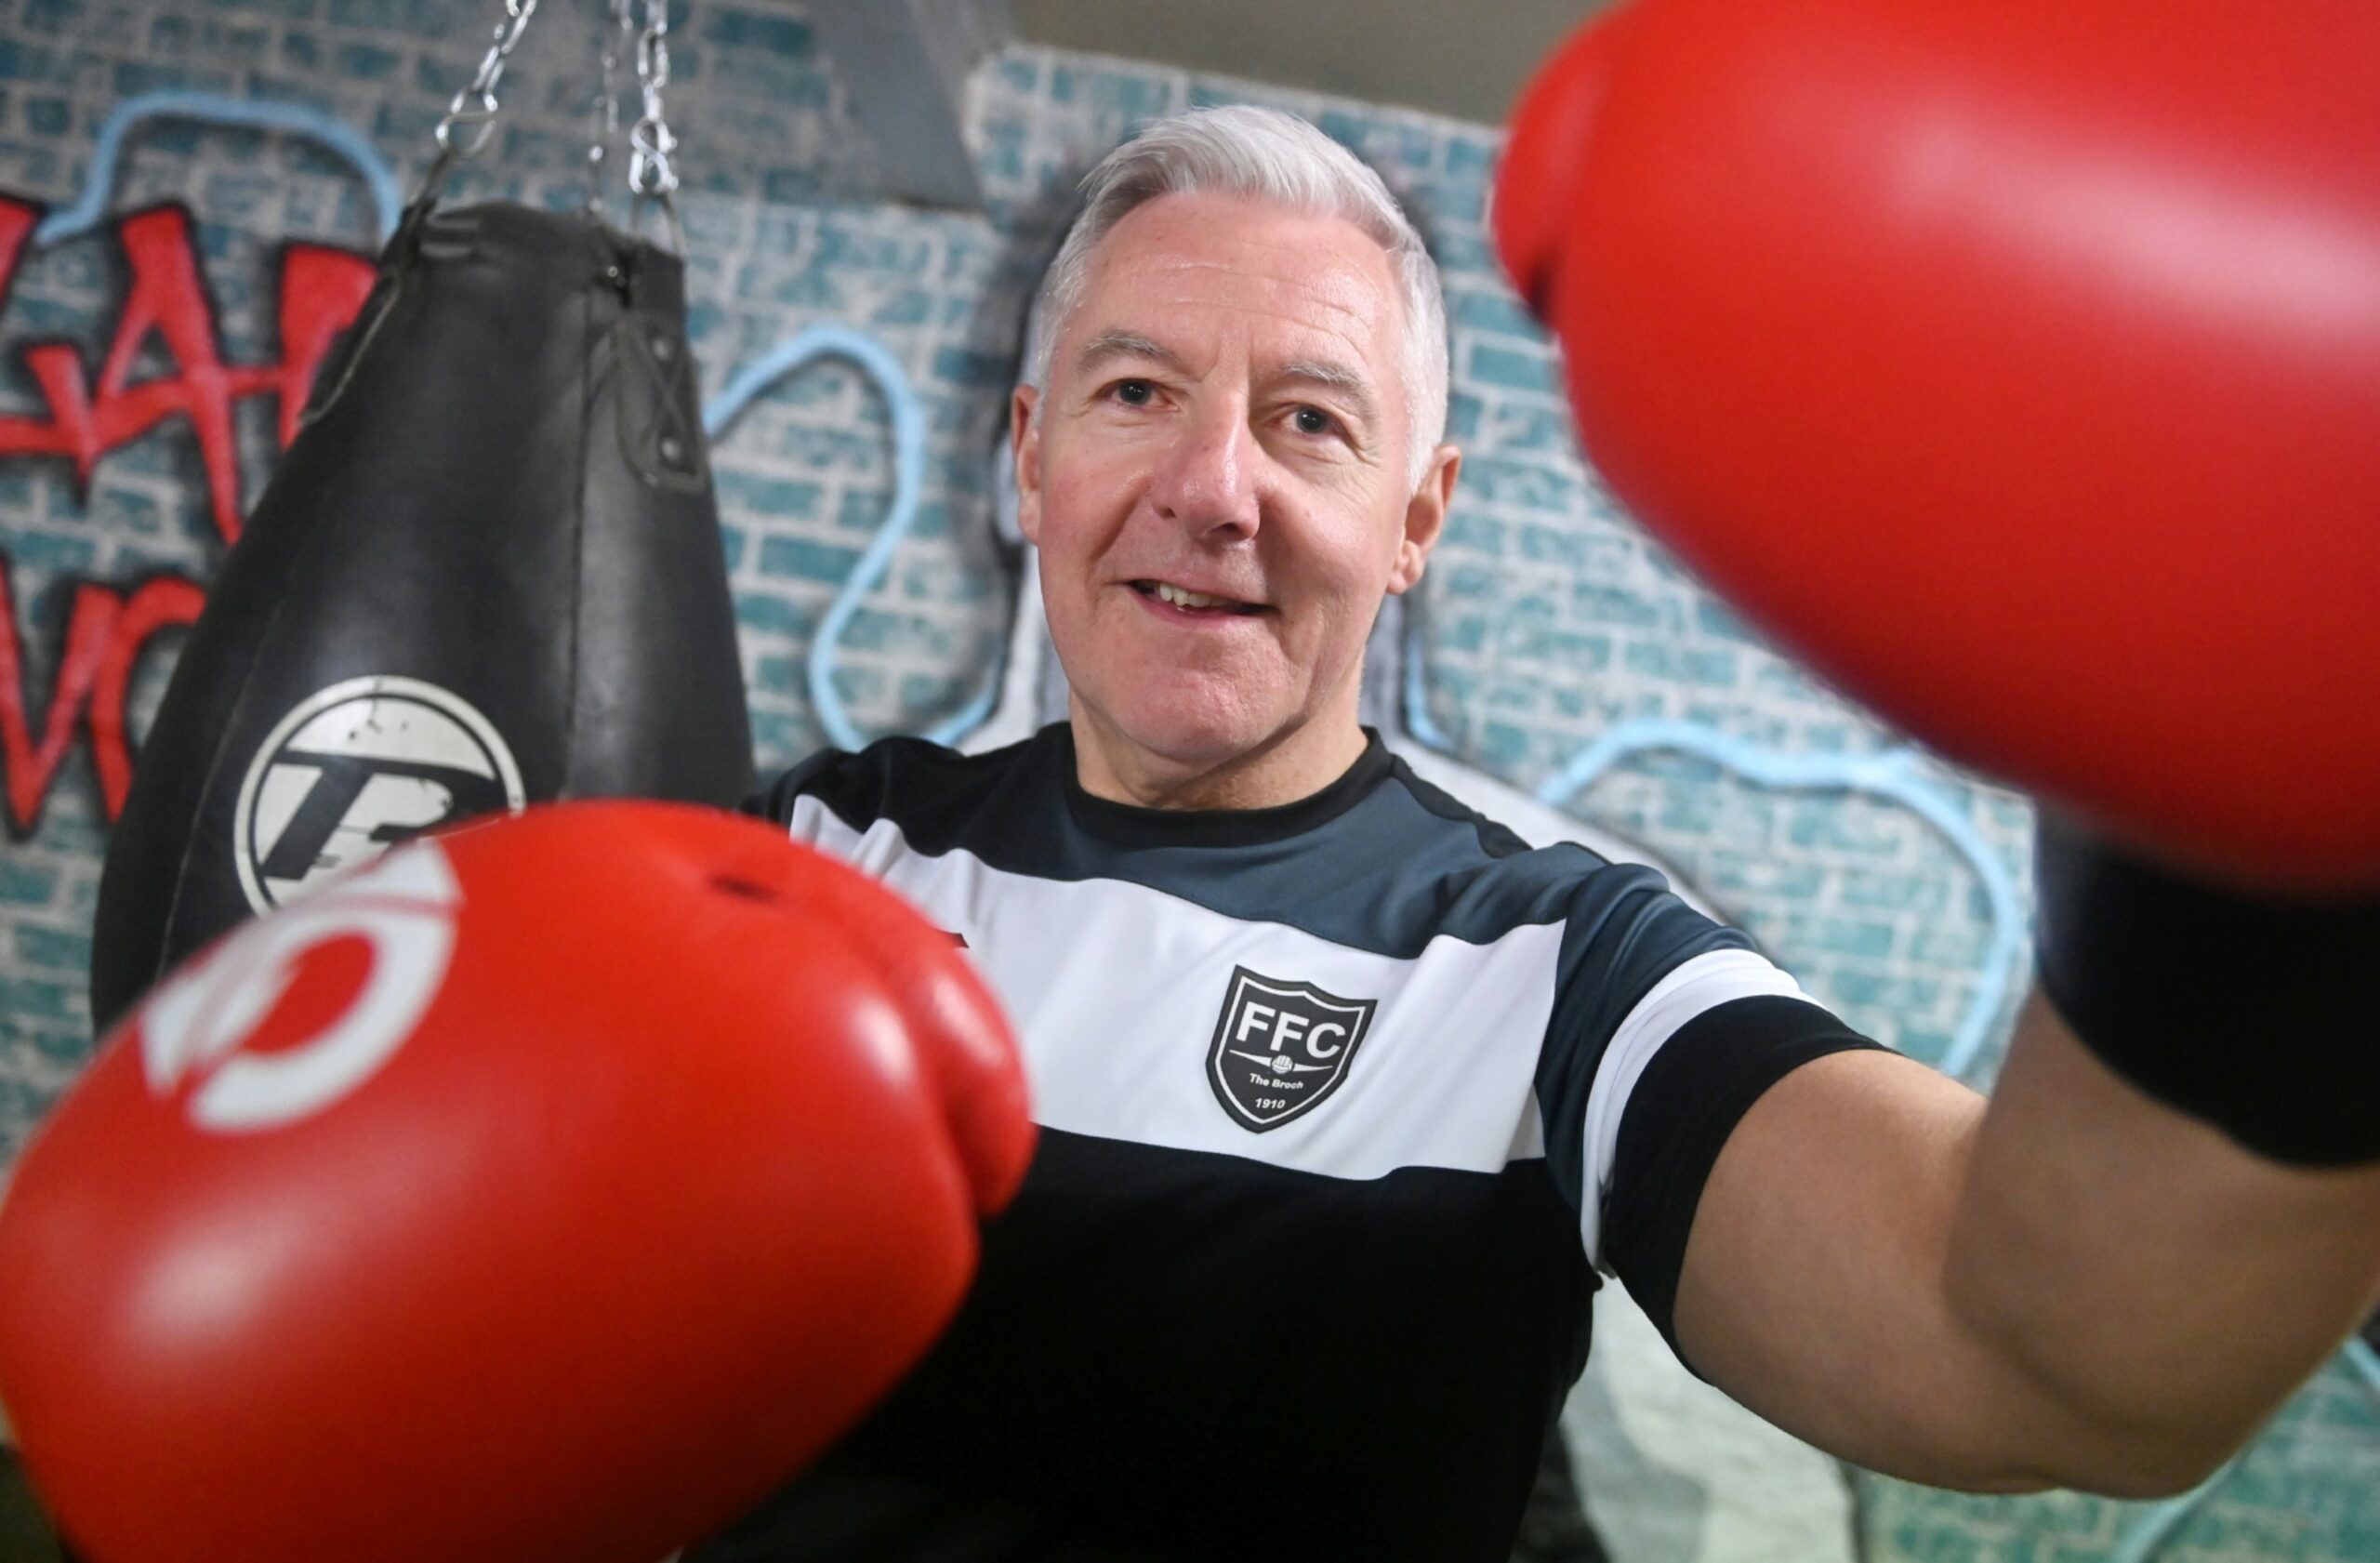 George Thom, from Aberdeen, achieved his weight loss through changing his diet and his local boxercise club. Picture by Chris Sumner